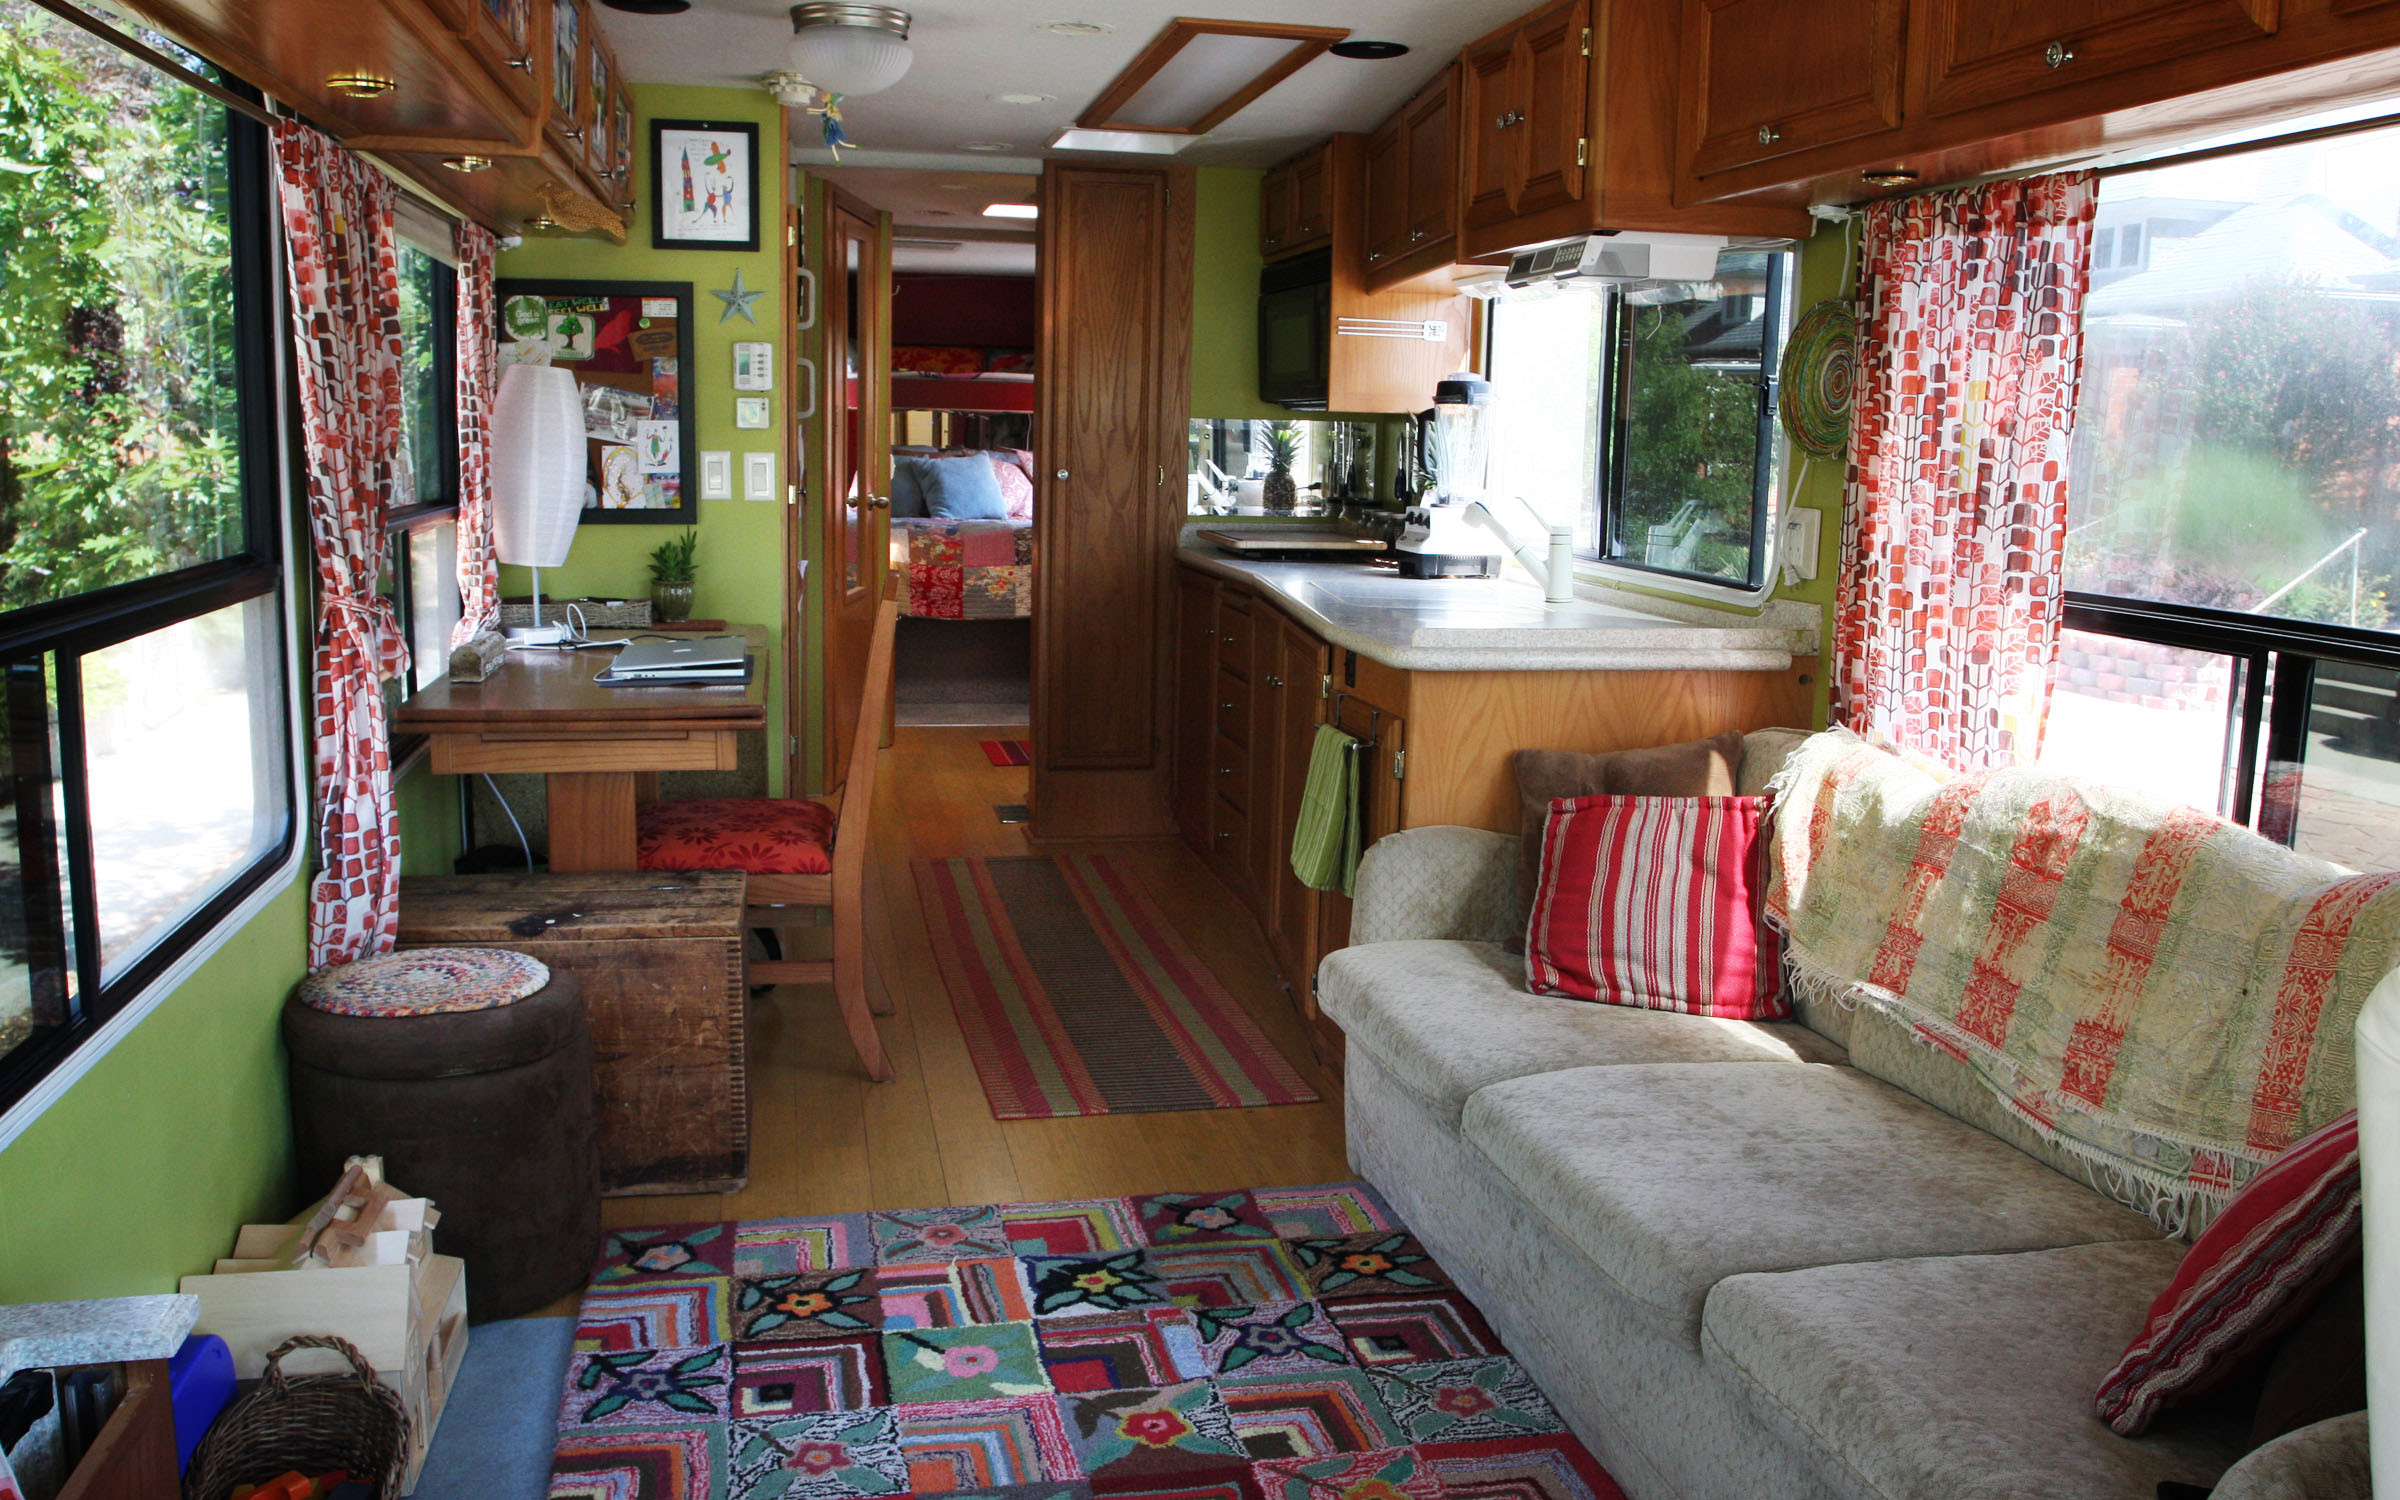 02_Our New RV Living Area.jpg